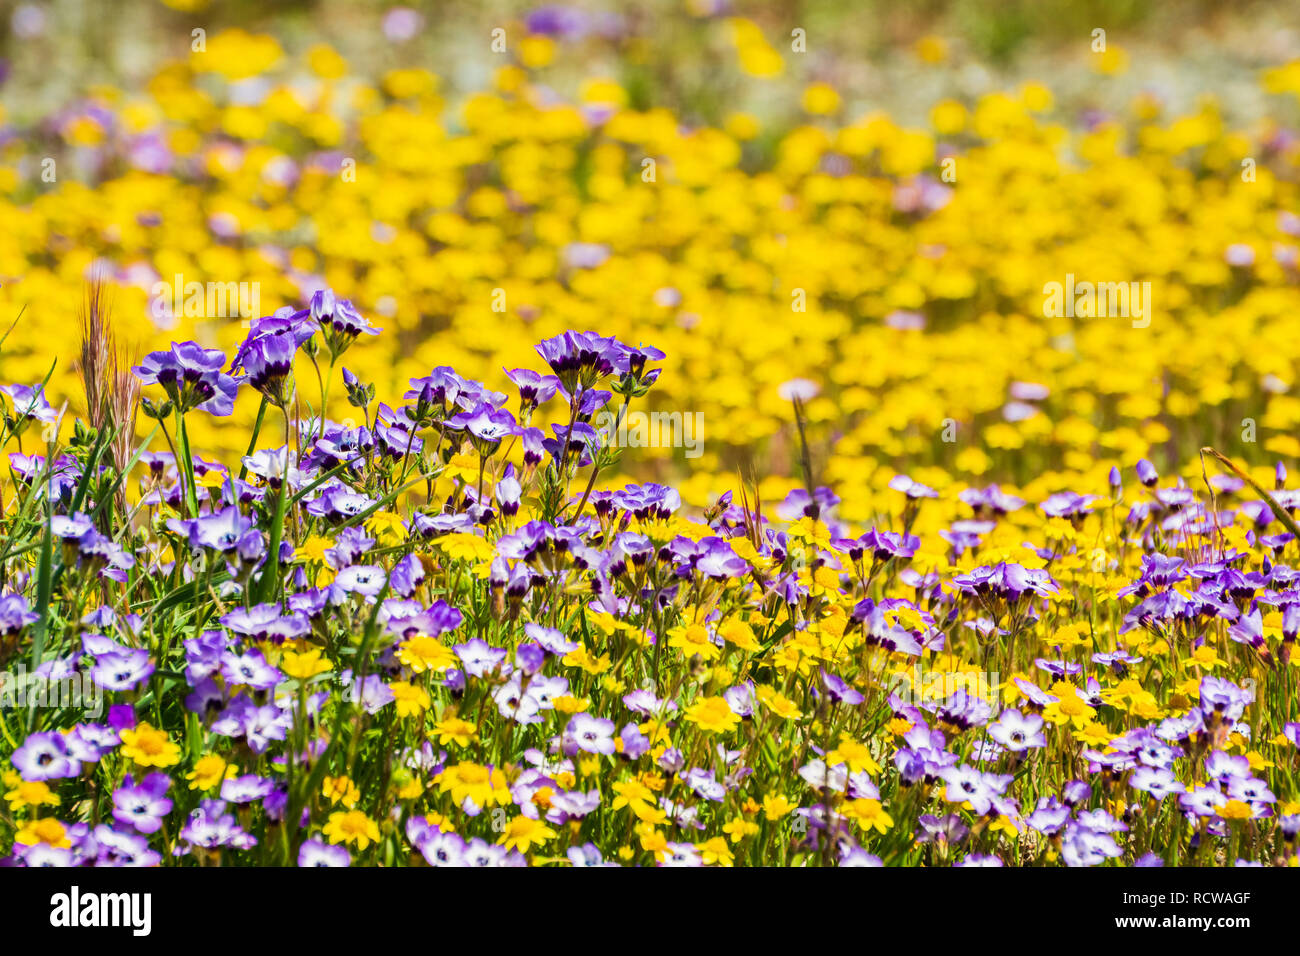 Goldfields and Gilia wildflowers blooming on a meadow, California Stock Photo